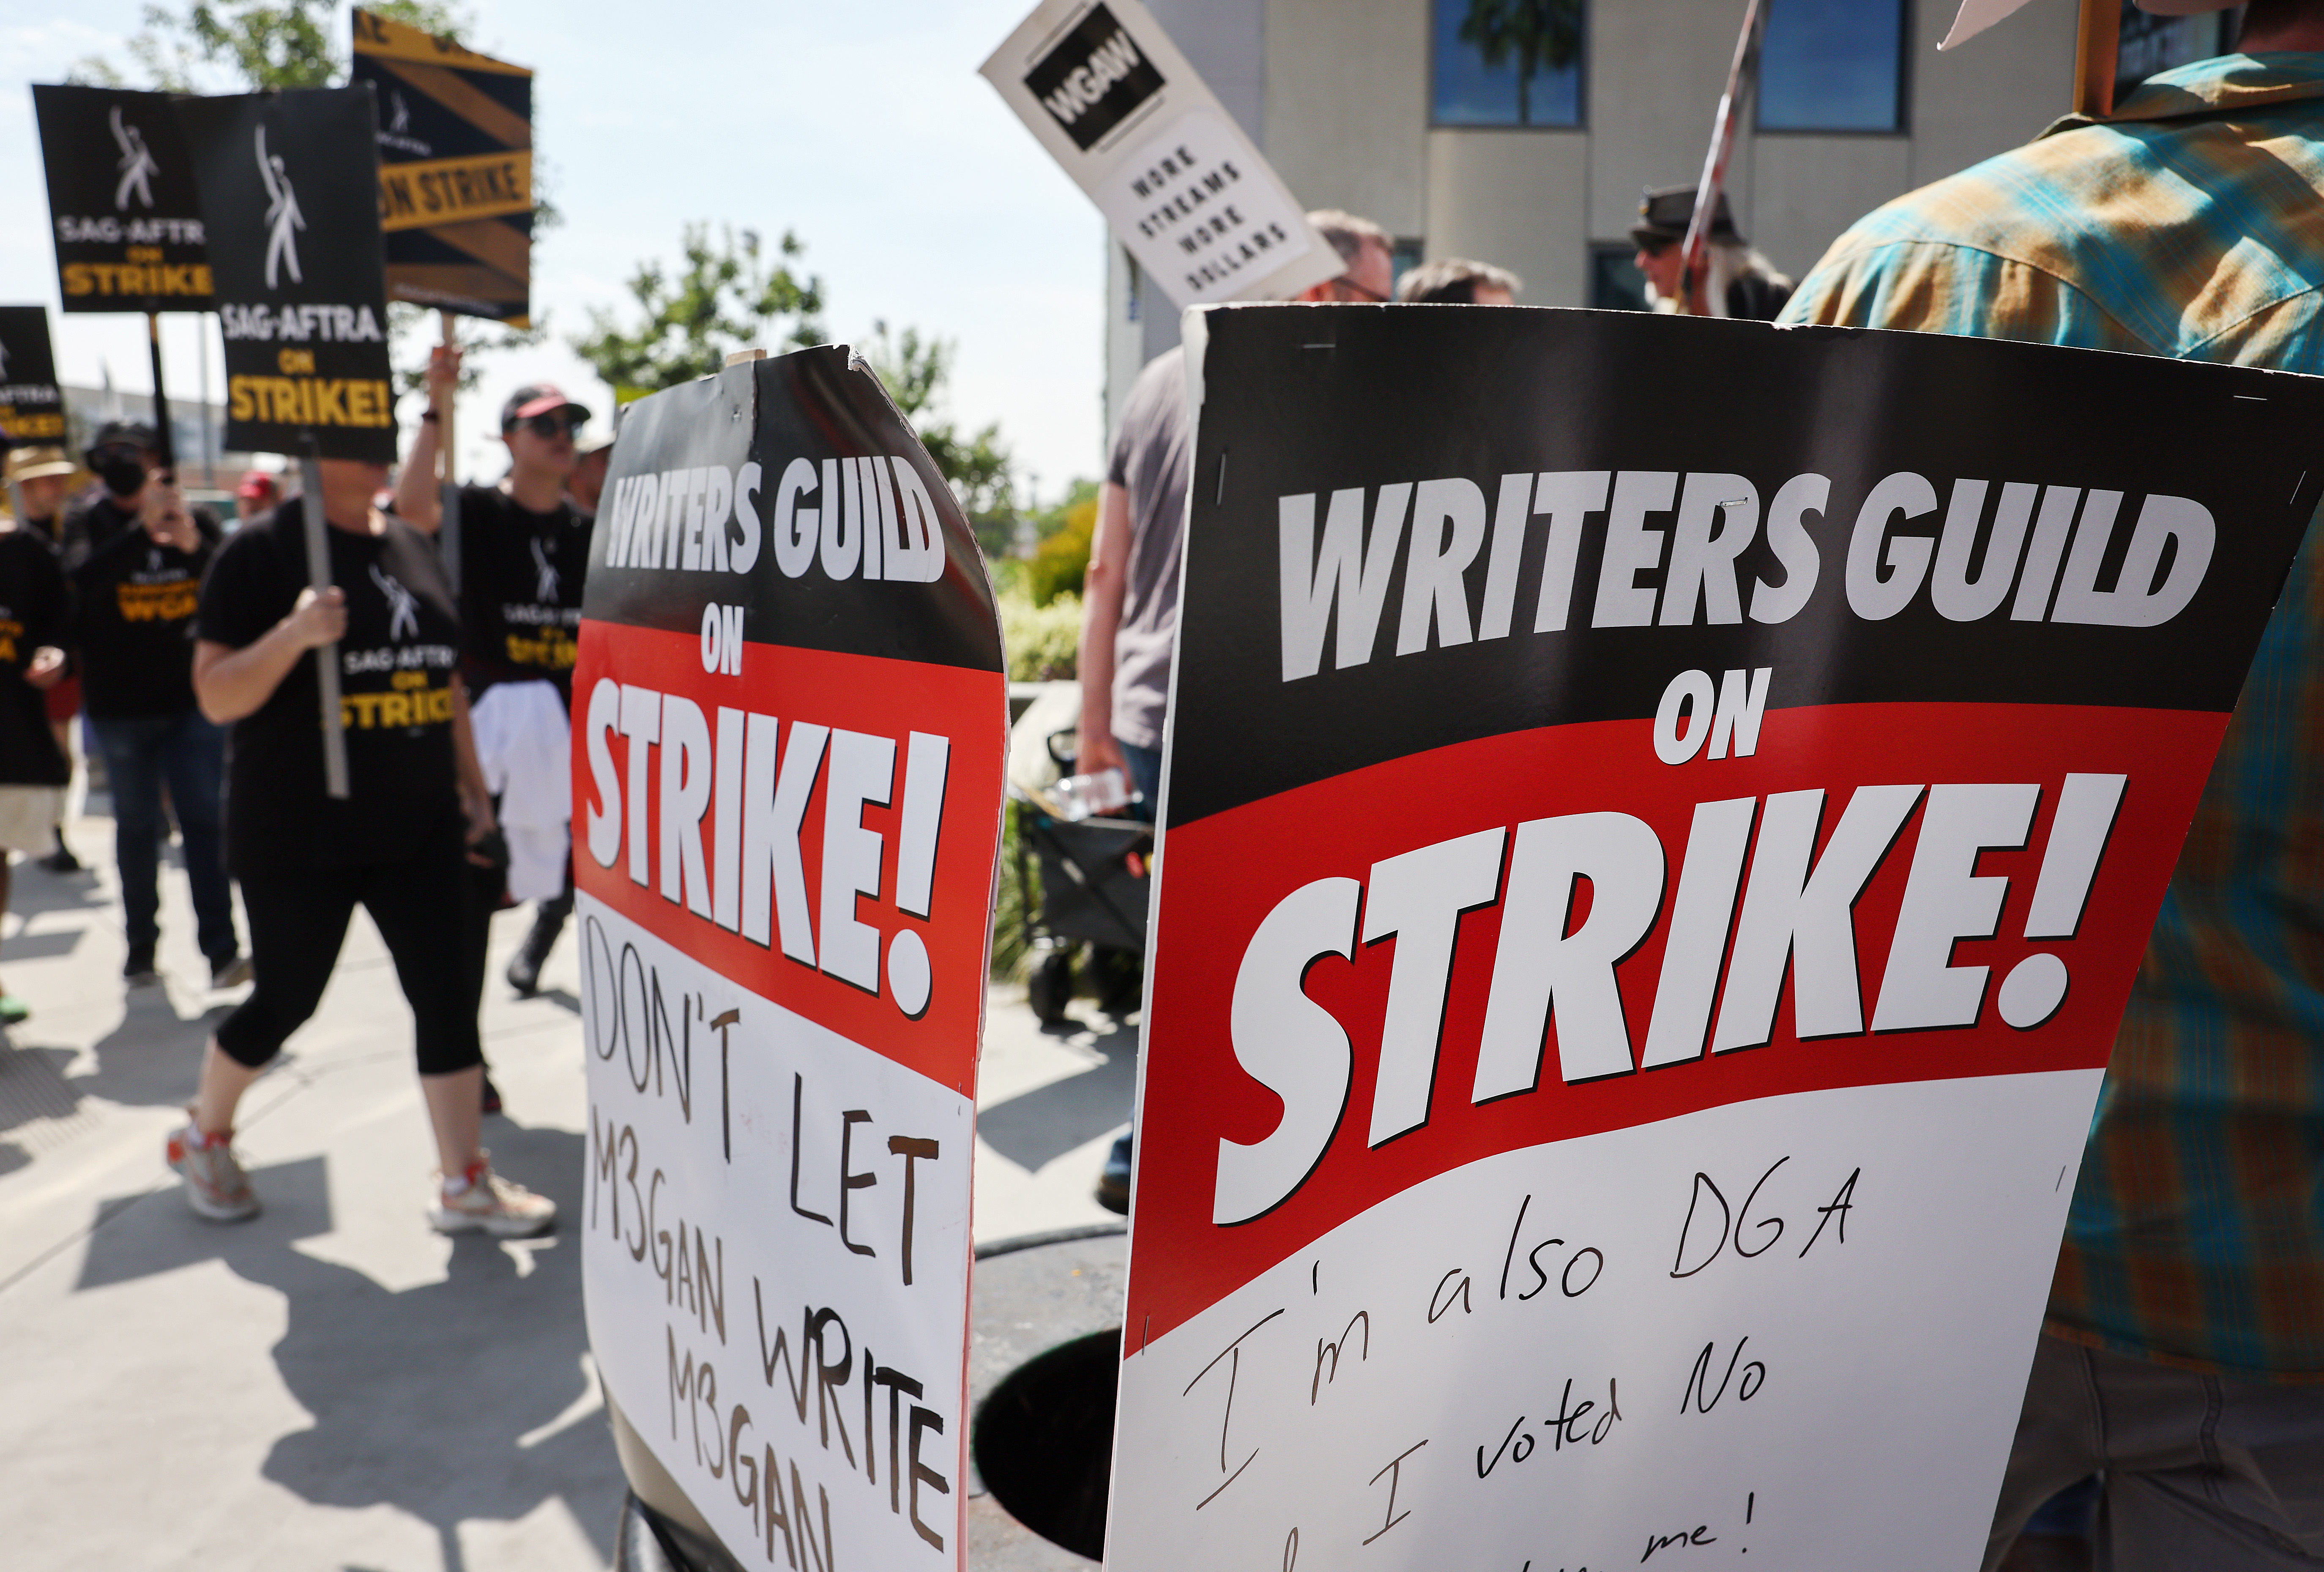 Writers Guild Members Man Picket Lines As Labor Talks Continue